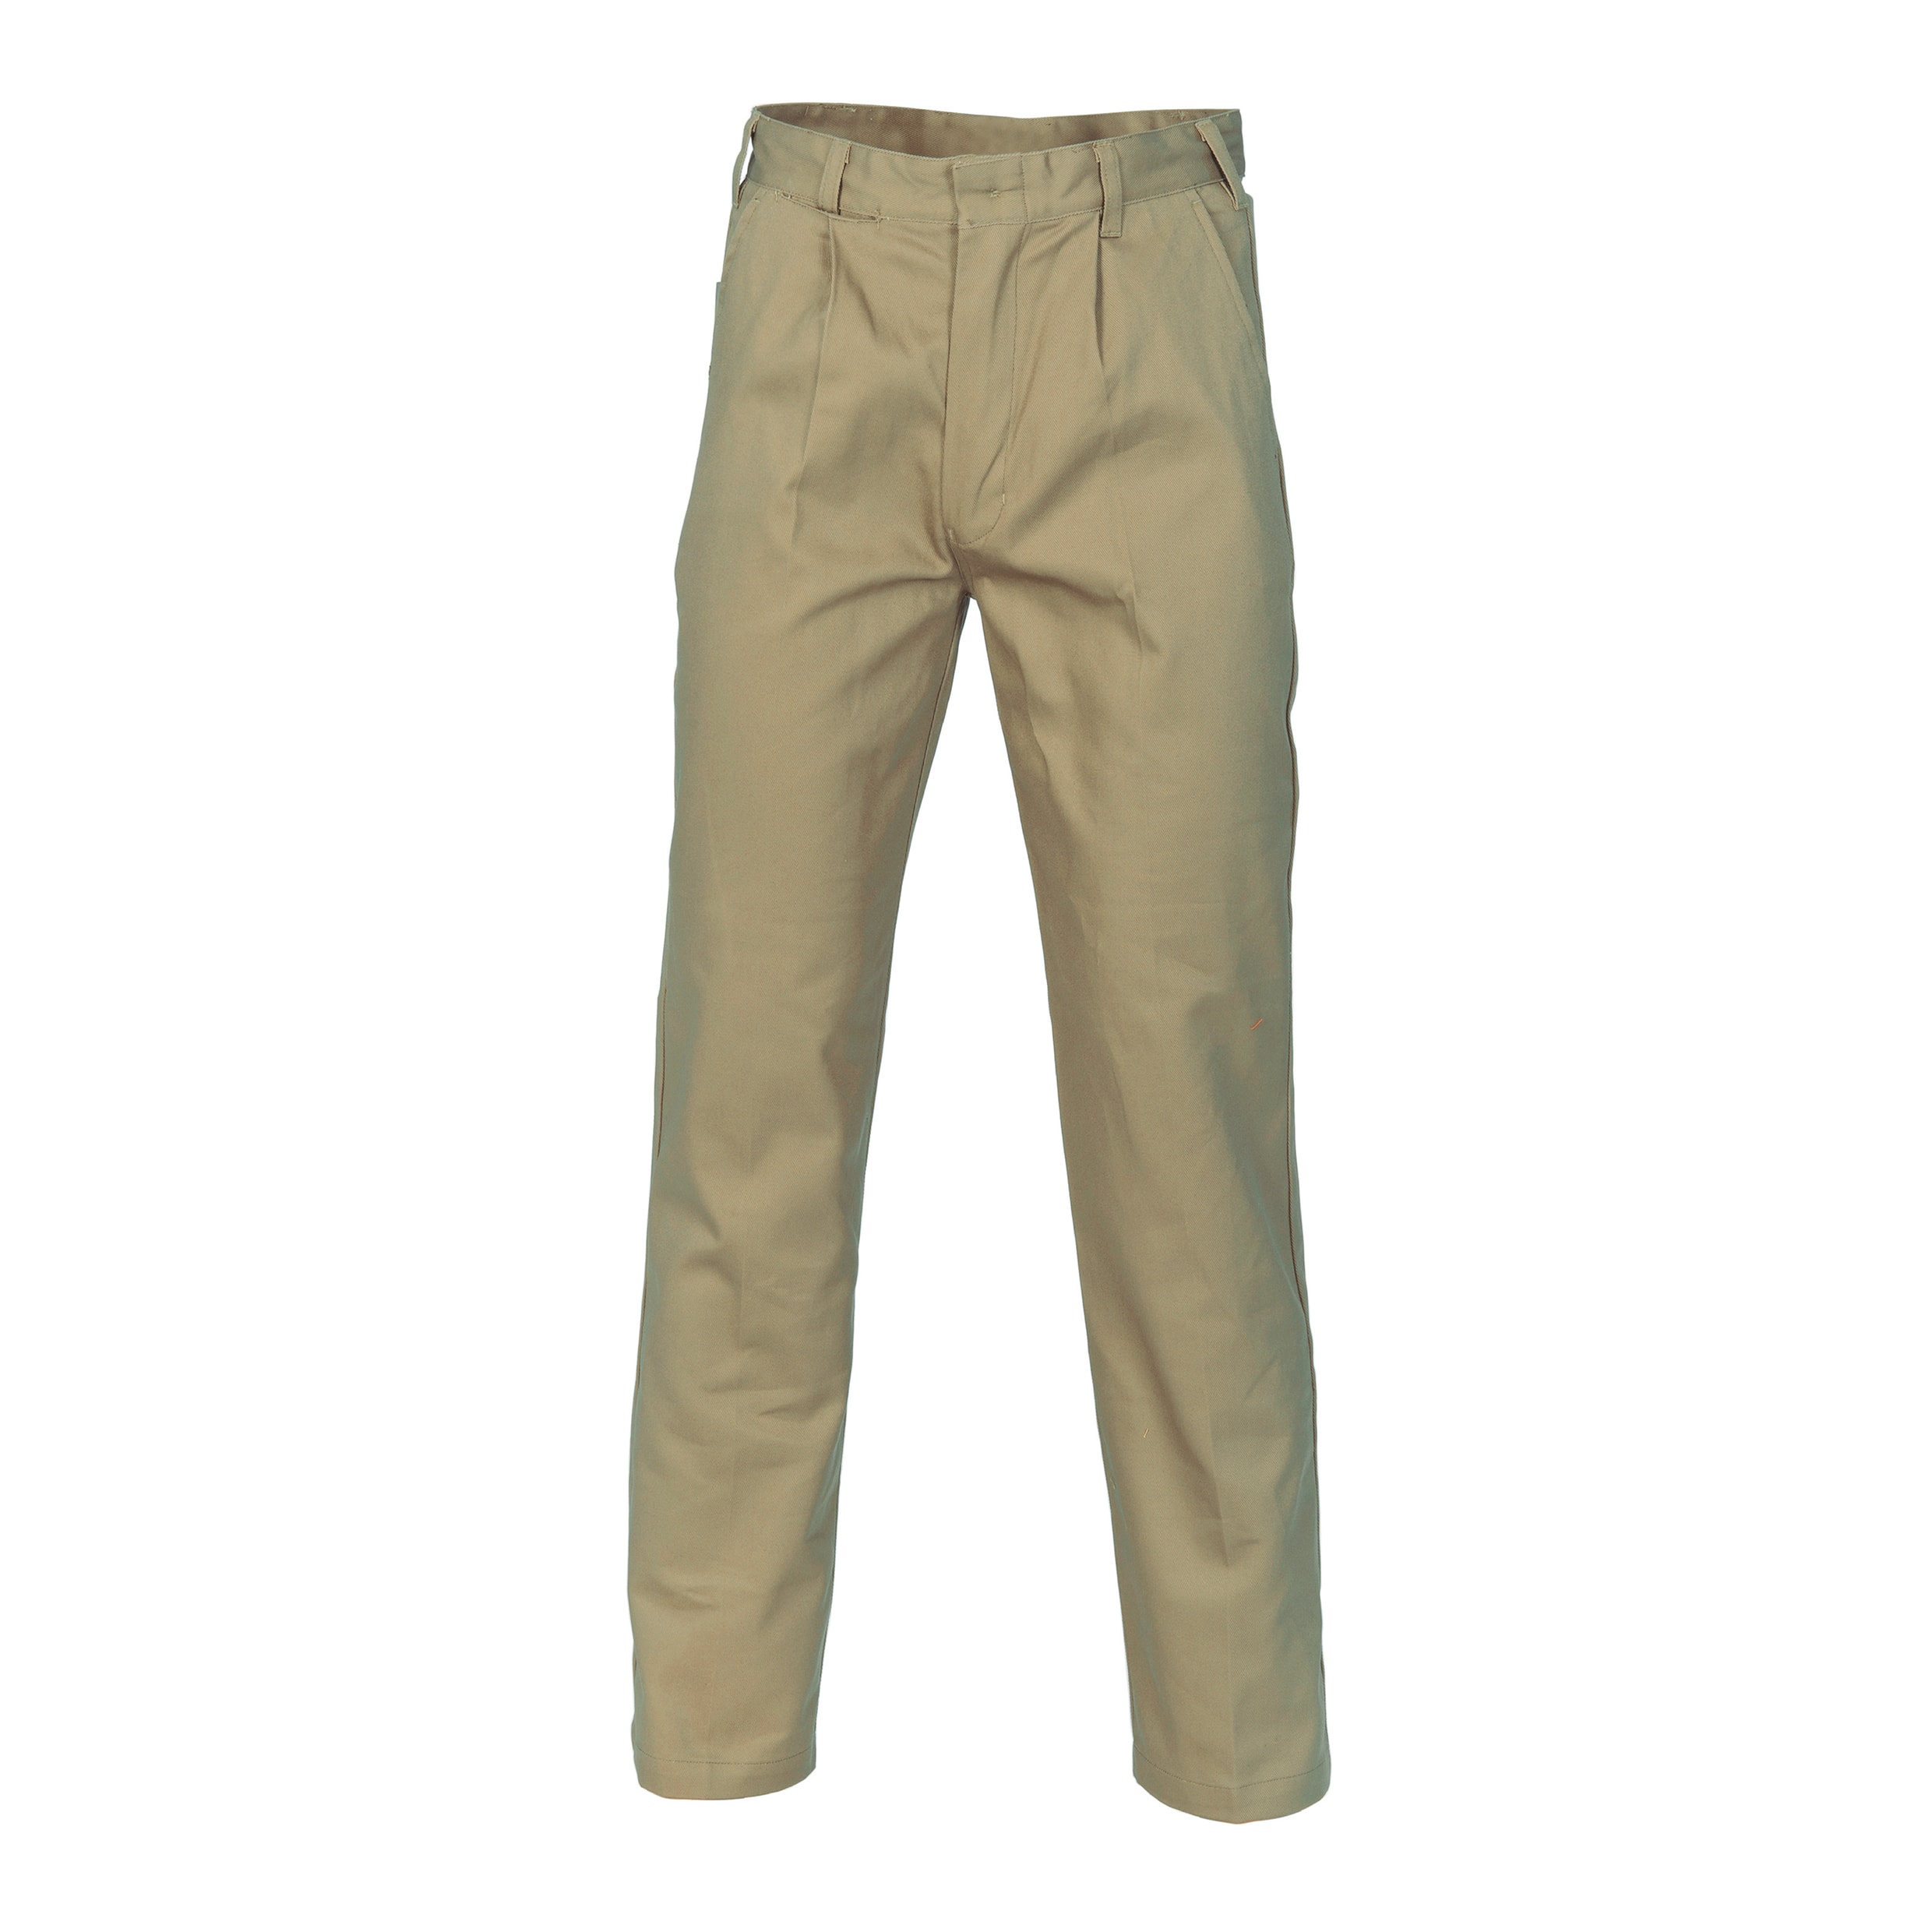 3311 DNC Cotton Drill Work Pants - Max Global Products